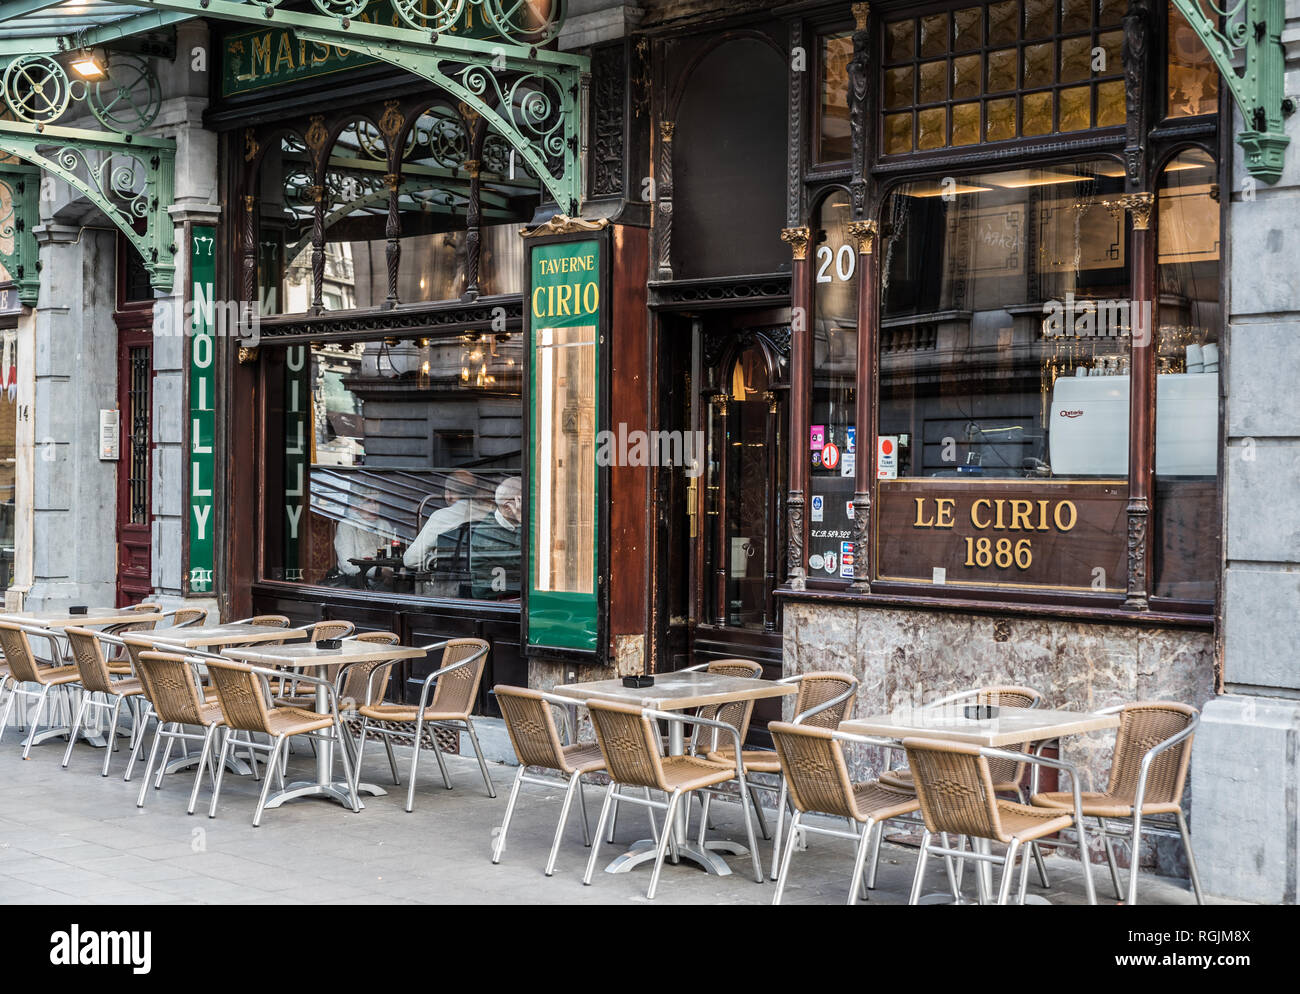 Brussels, Belgium - 01 18 2019: Decorated facade and terrace of the cafe and restaurant Le Cirio in Art Nouveau style Stock Photo